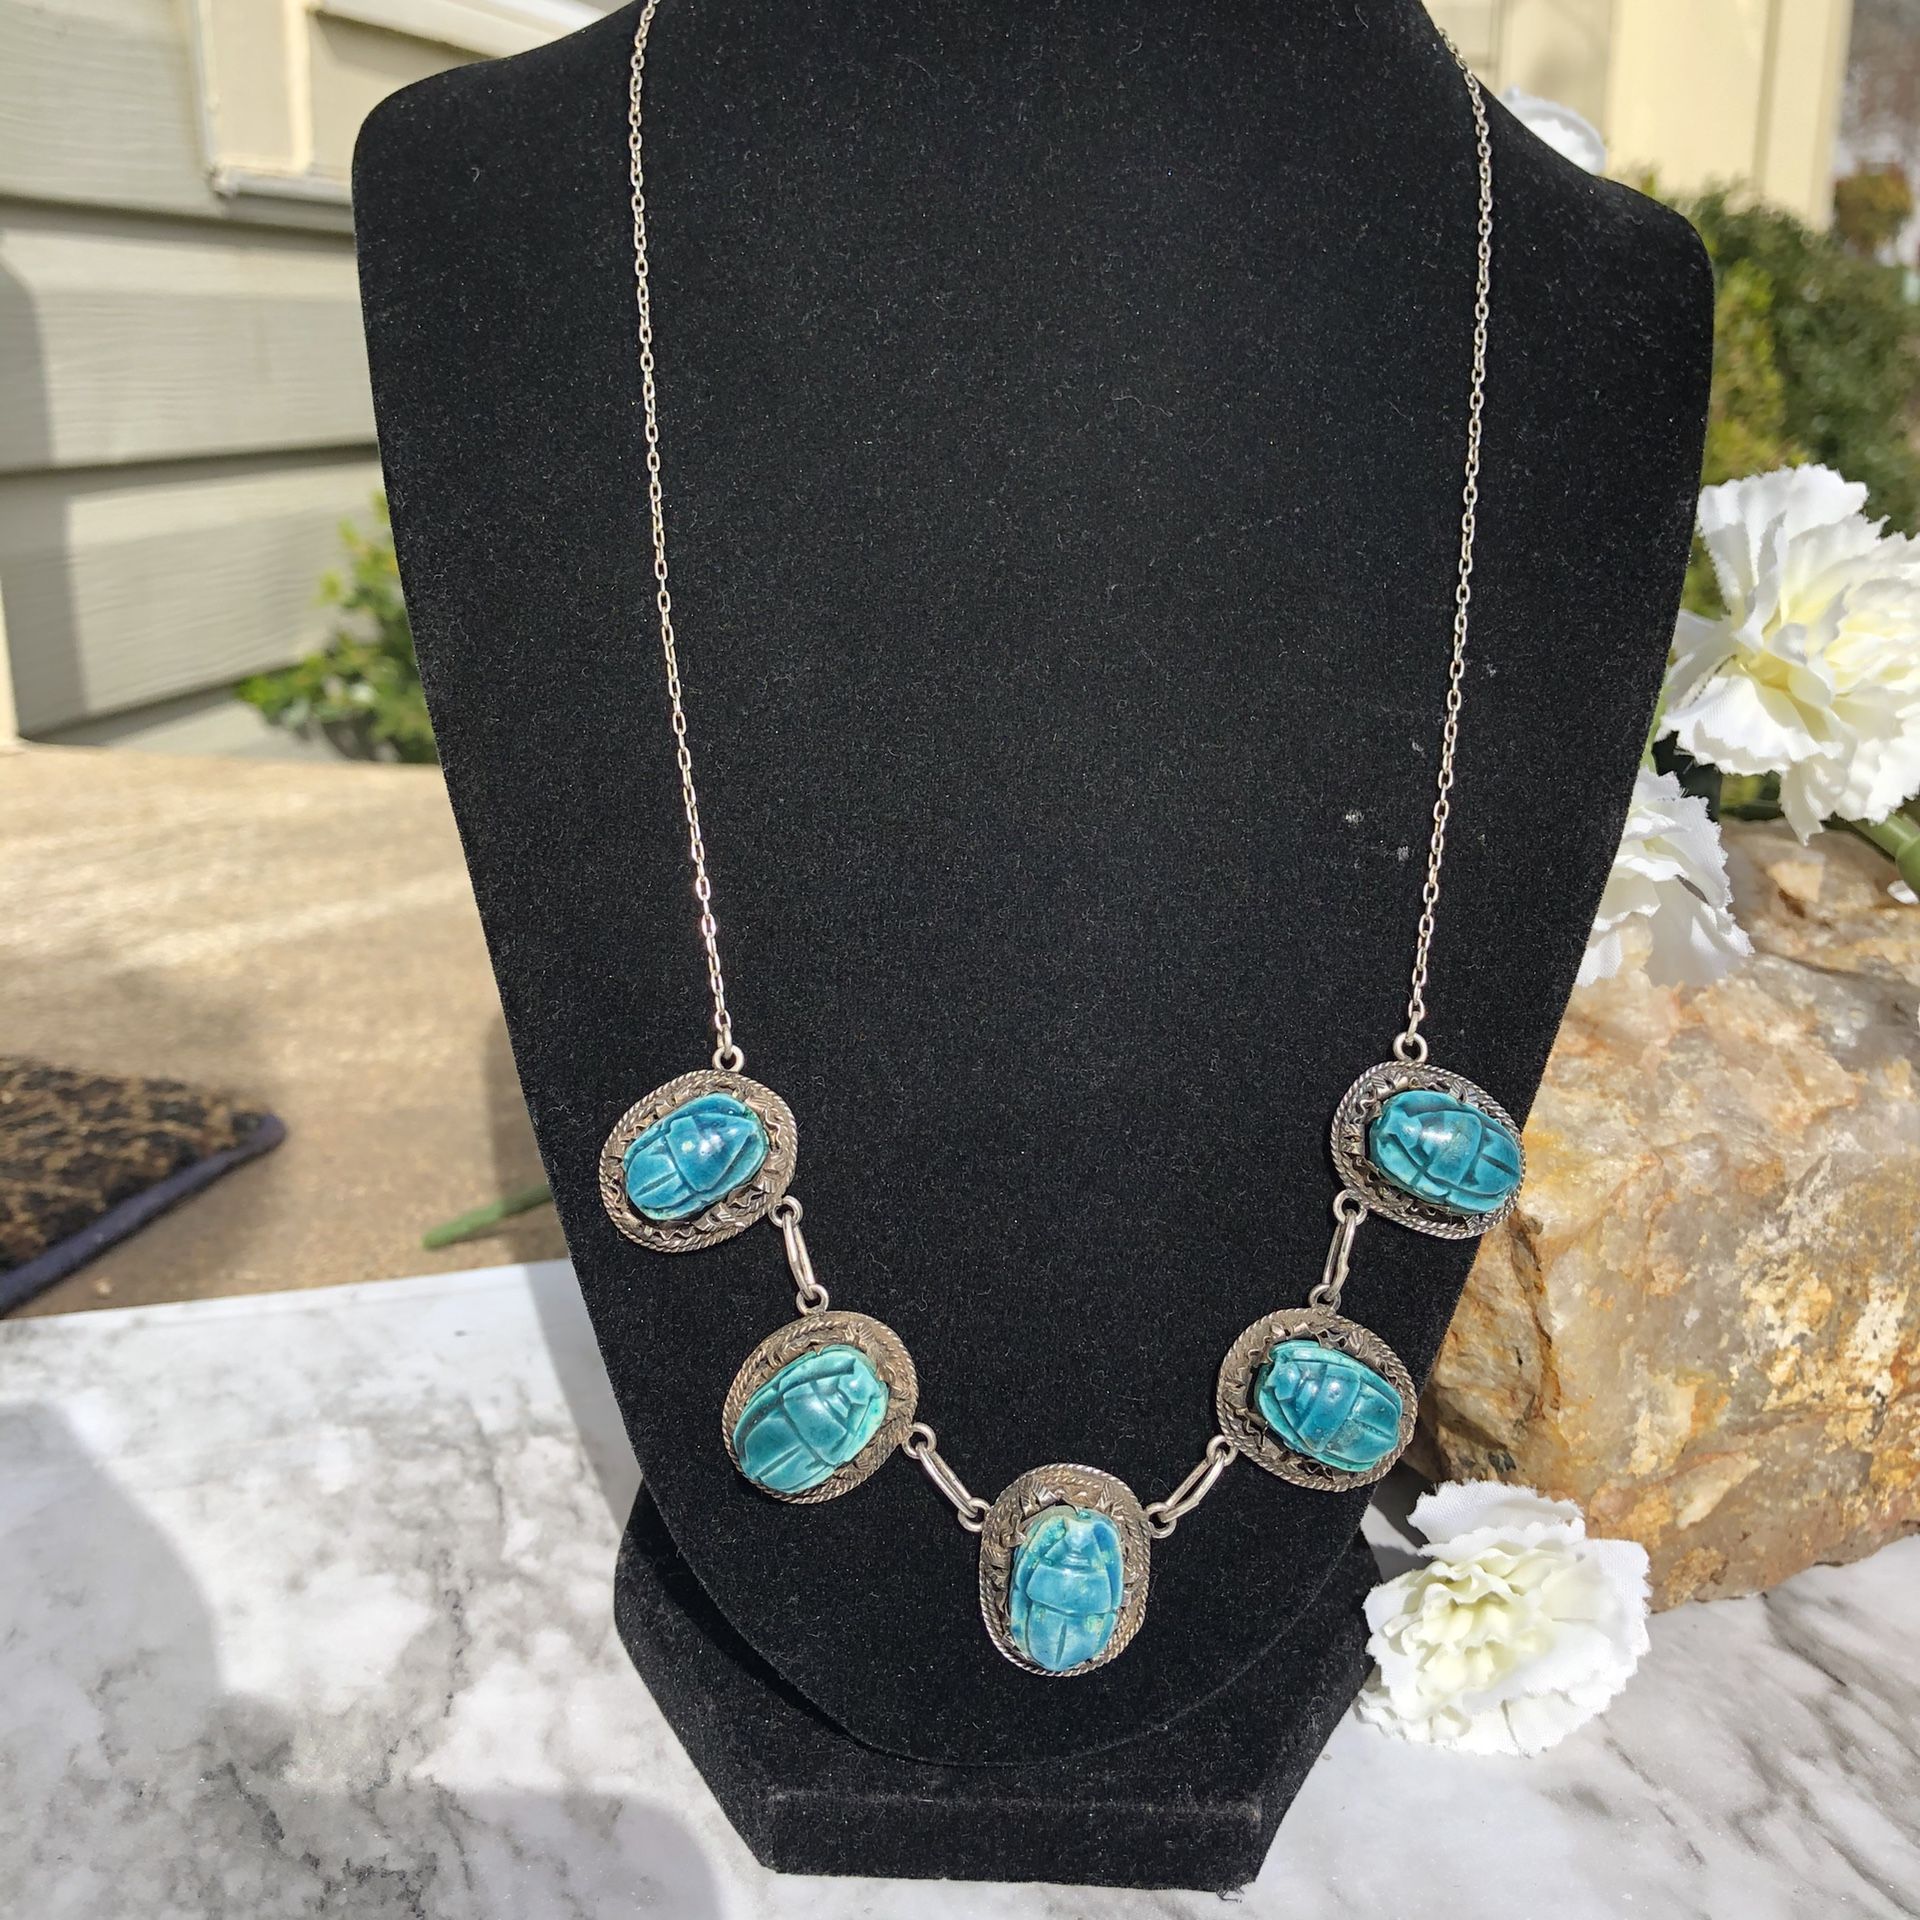 Vintage Egyptian revival turquoise faience scarab sterling silver link necklace